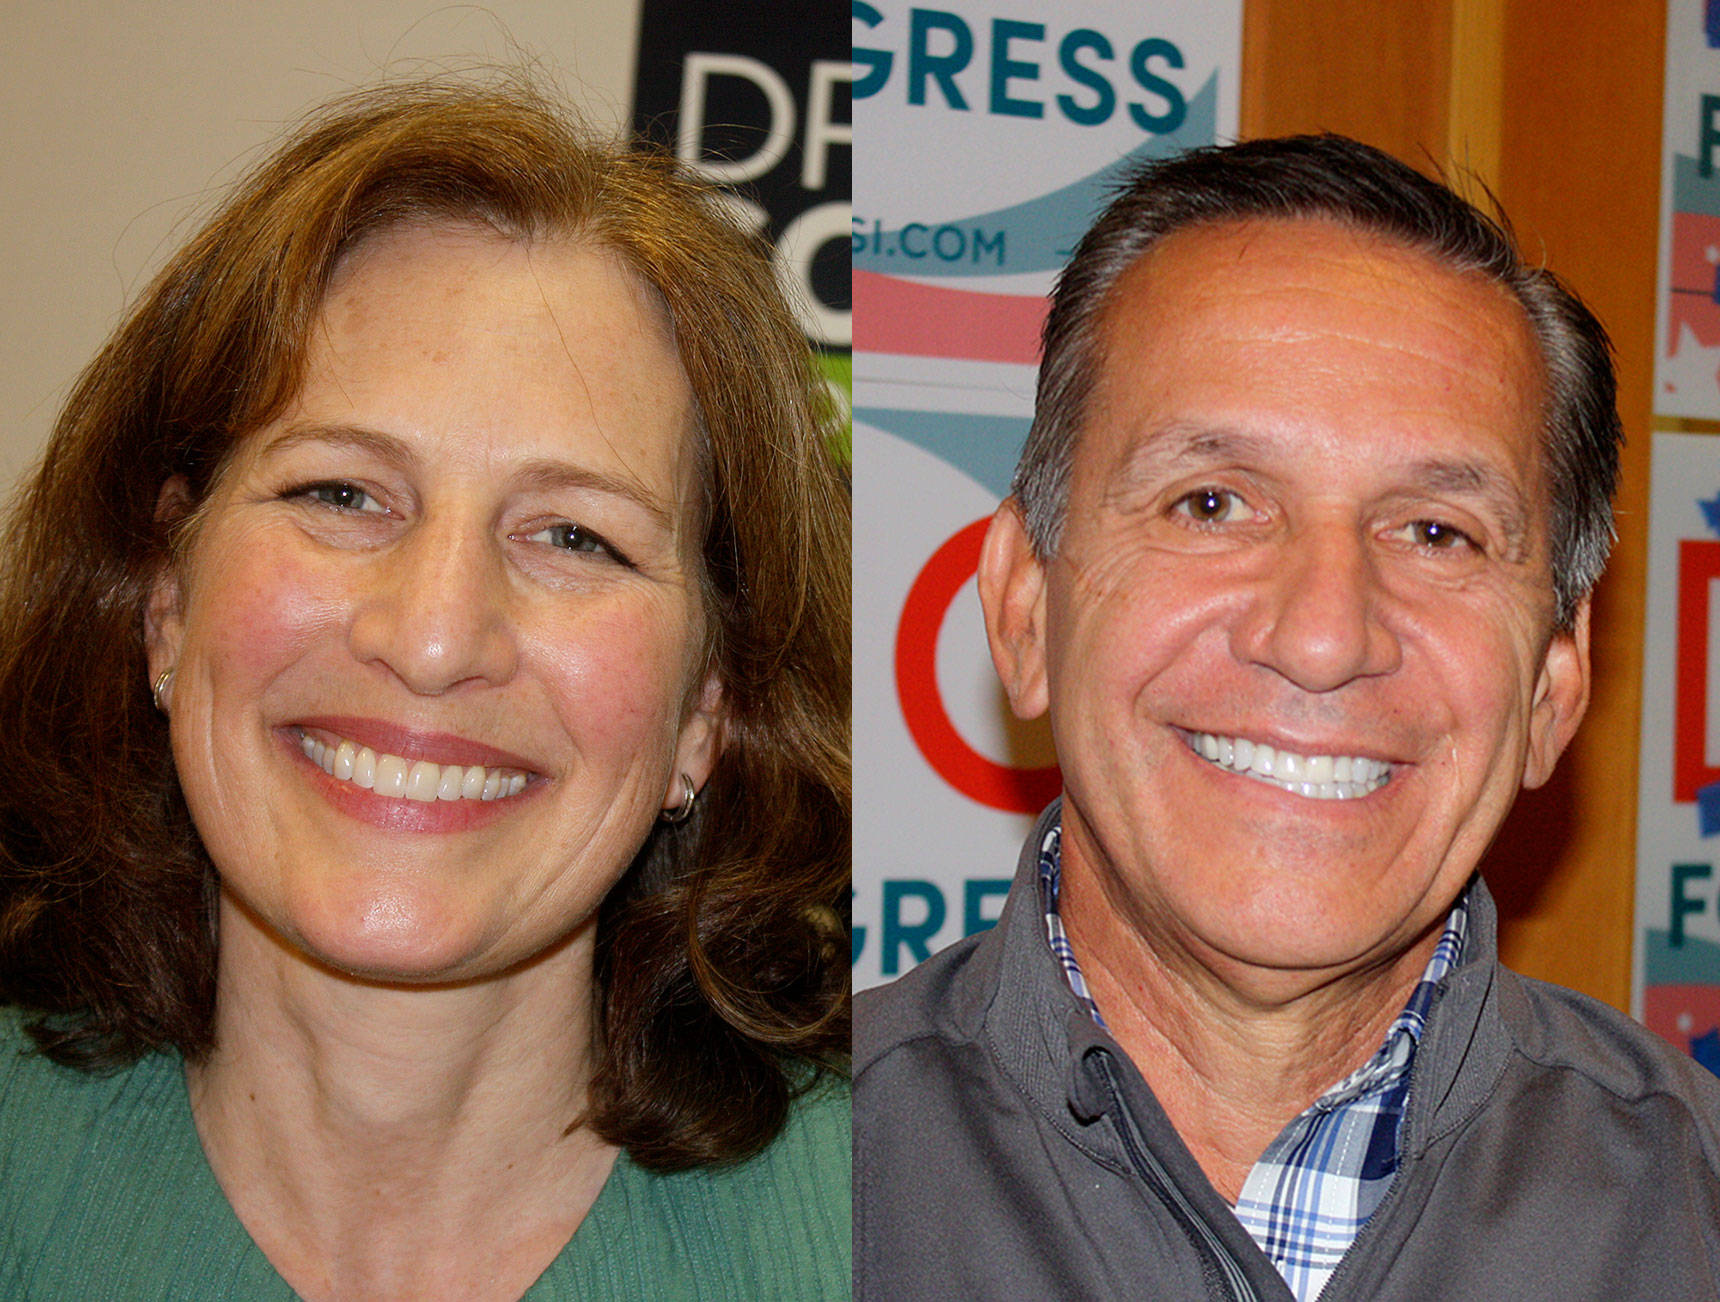 The race for Washington’s 8th Congressional District is between Kim Schrier (D) and Dino Rossi (R). File photo